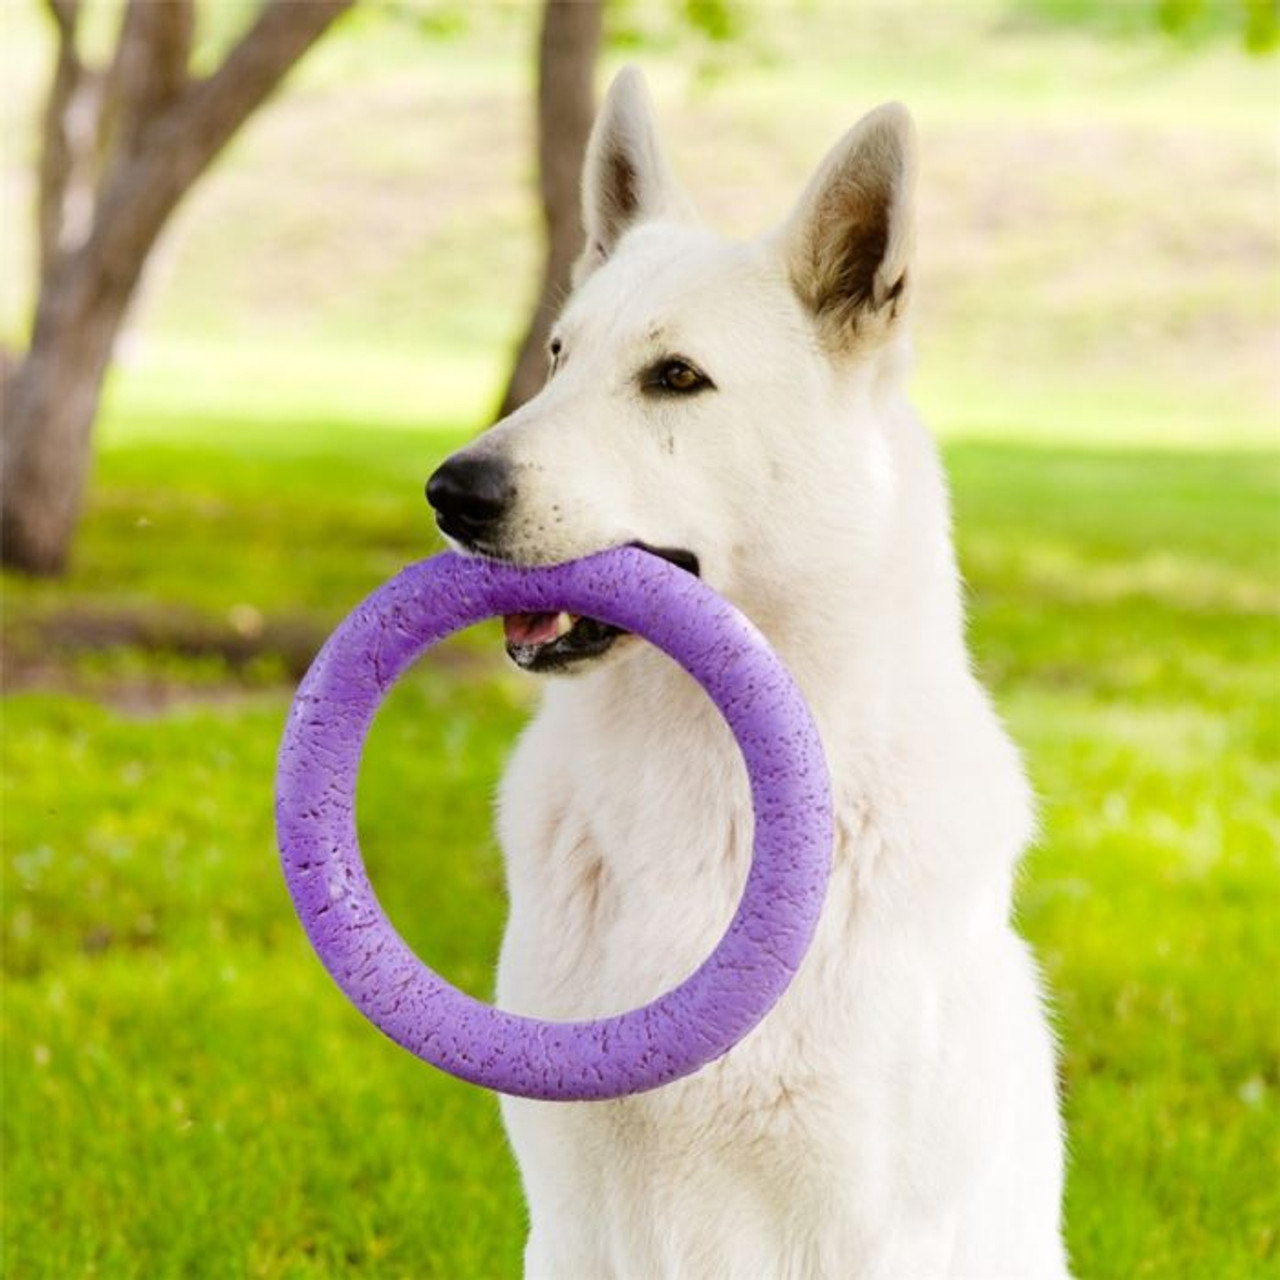 https://cdn11.bigcommerce.com/s-d20sba7s0/images/stencil/1280x1280/products/2762/7959/14516_5440a_2_Puller_Interactive_Dog_Toy____30884.1630379354.jpg?c=1